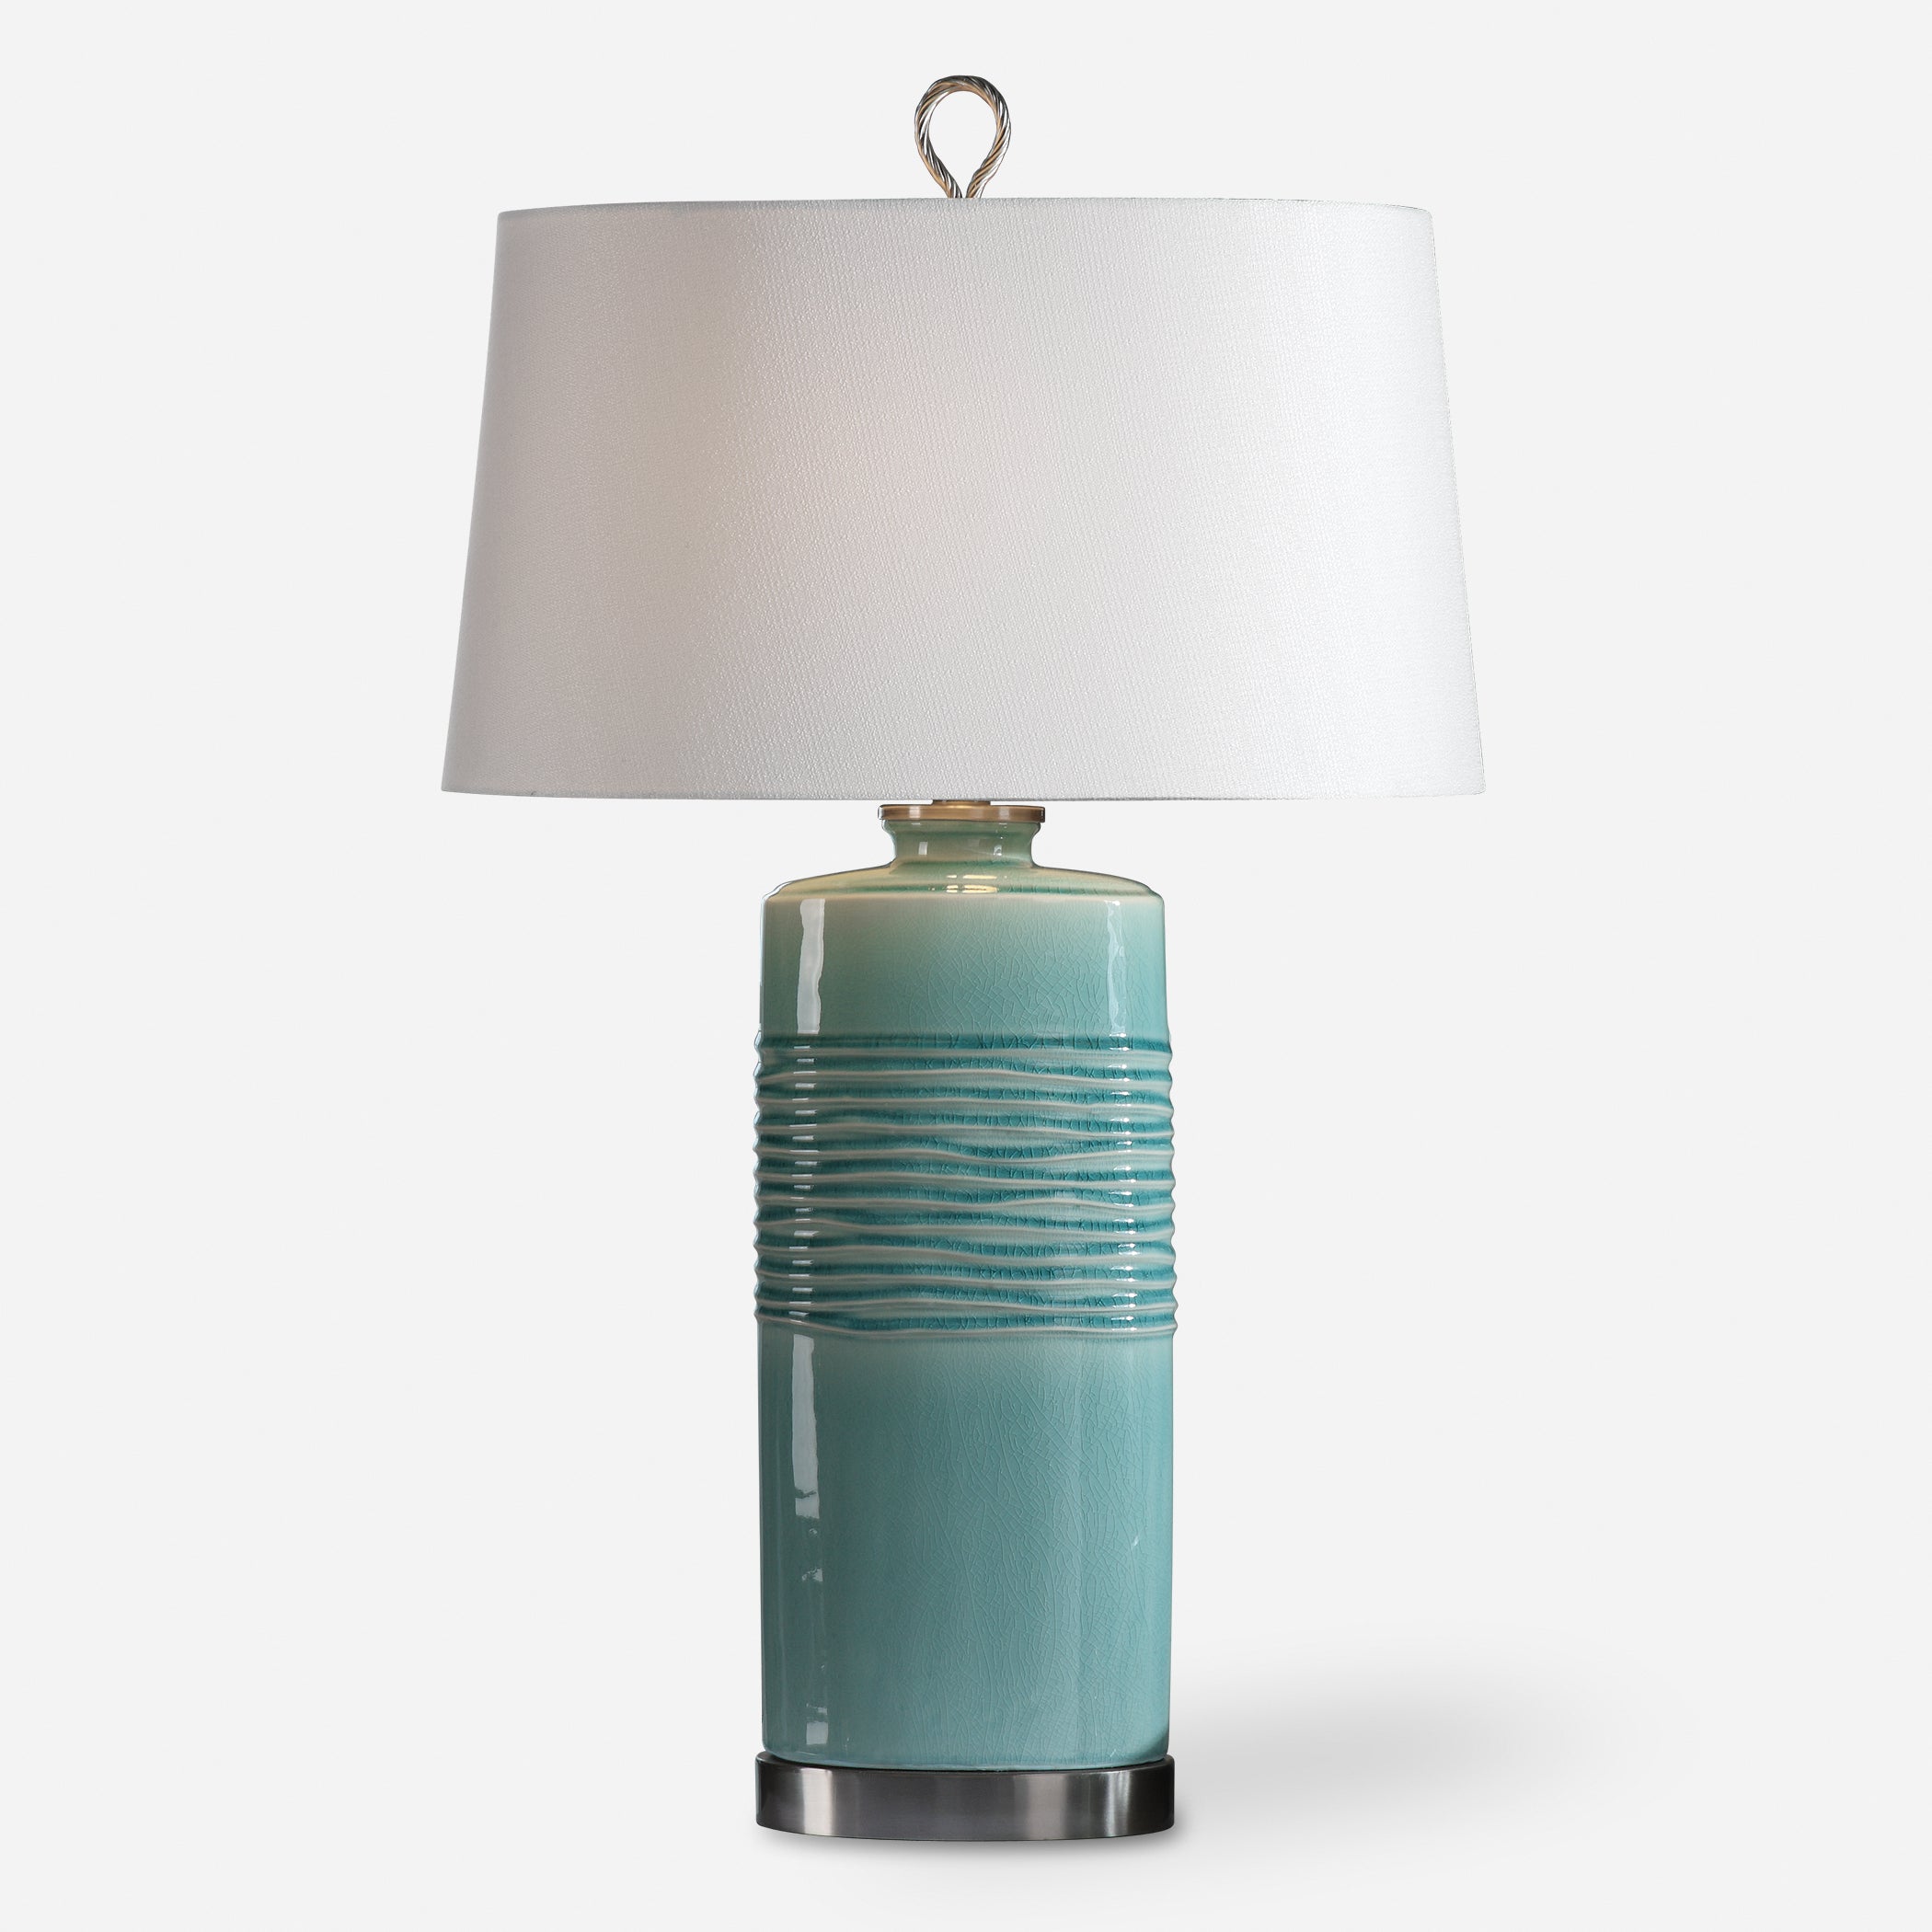 Uttermost Rila Distressed Teal Table Lamp Distressed Teal Table Lamp Uttermost   